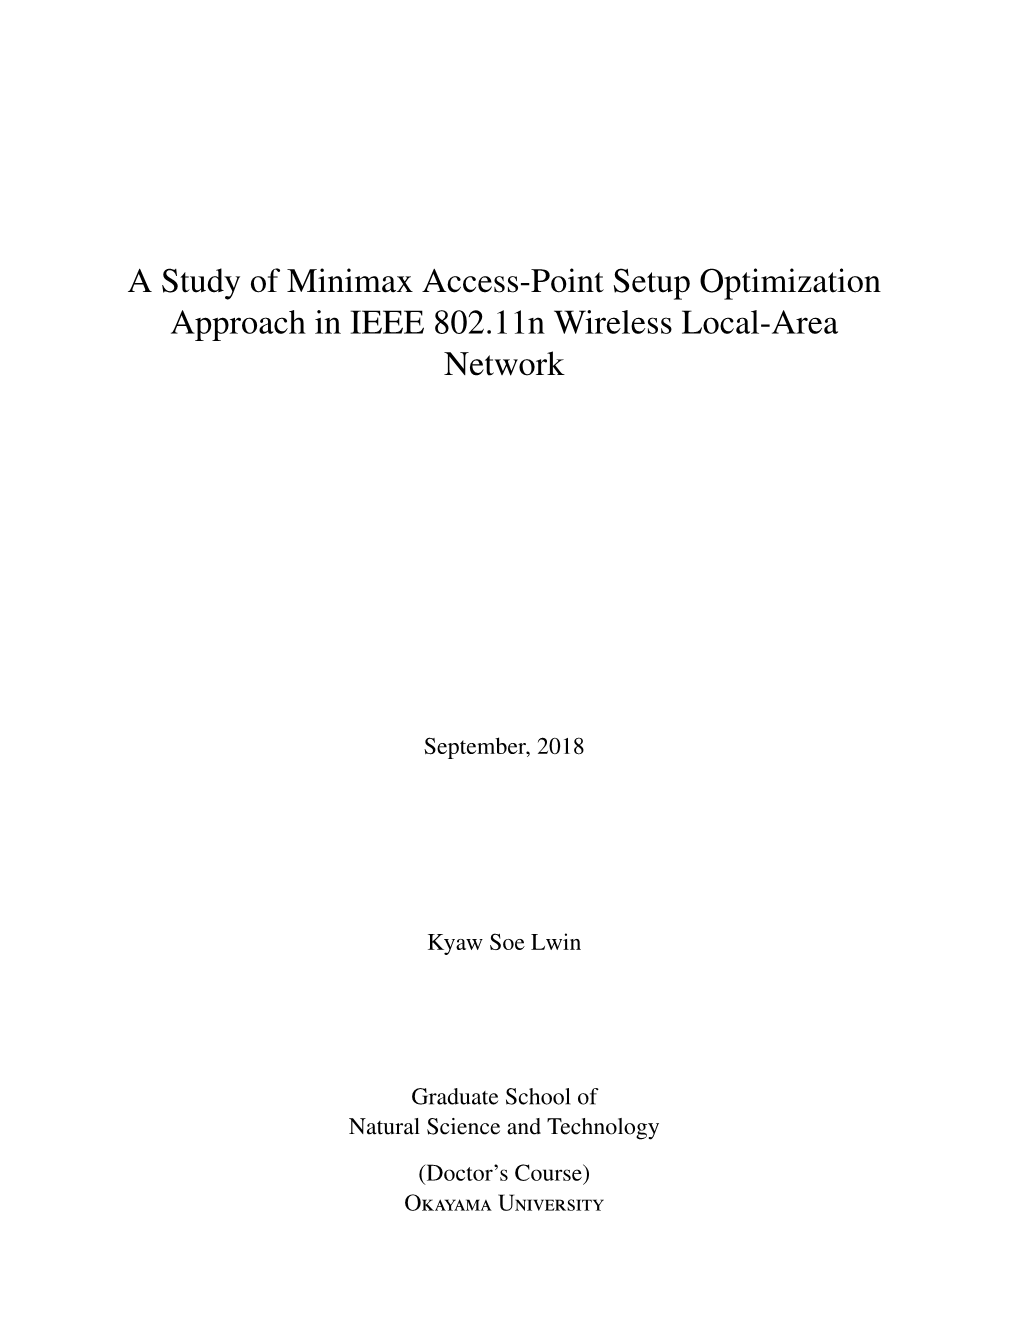 A Study of Minimax Access-Point Setup Optimization Approach in IEEE 802.11N Wireless Local-Area Network